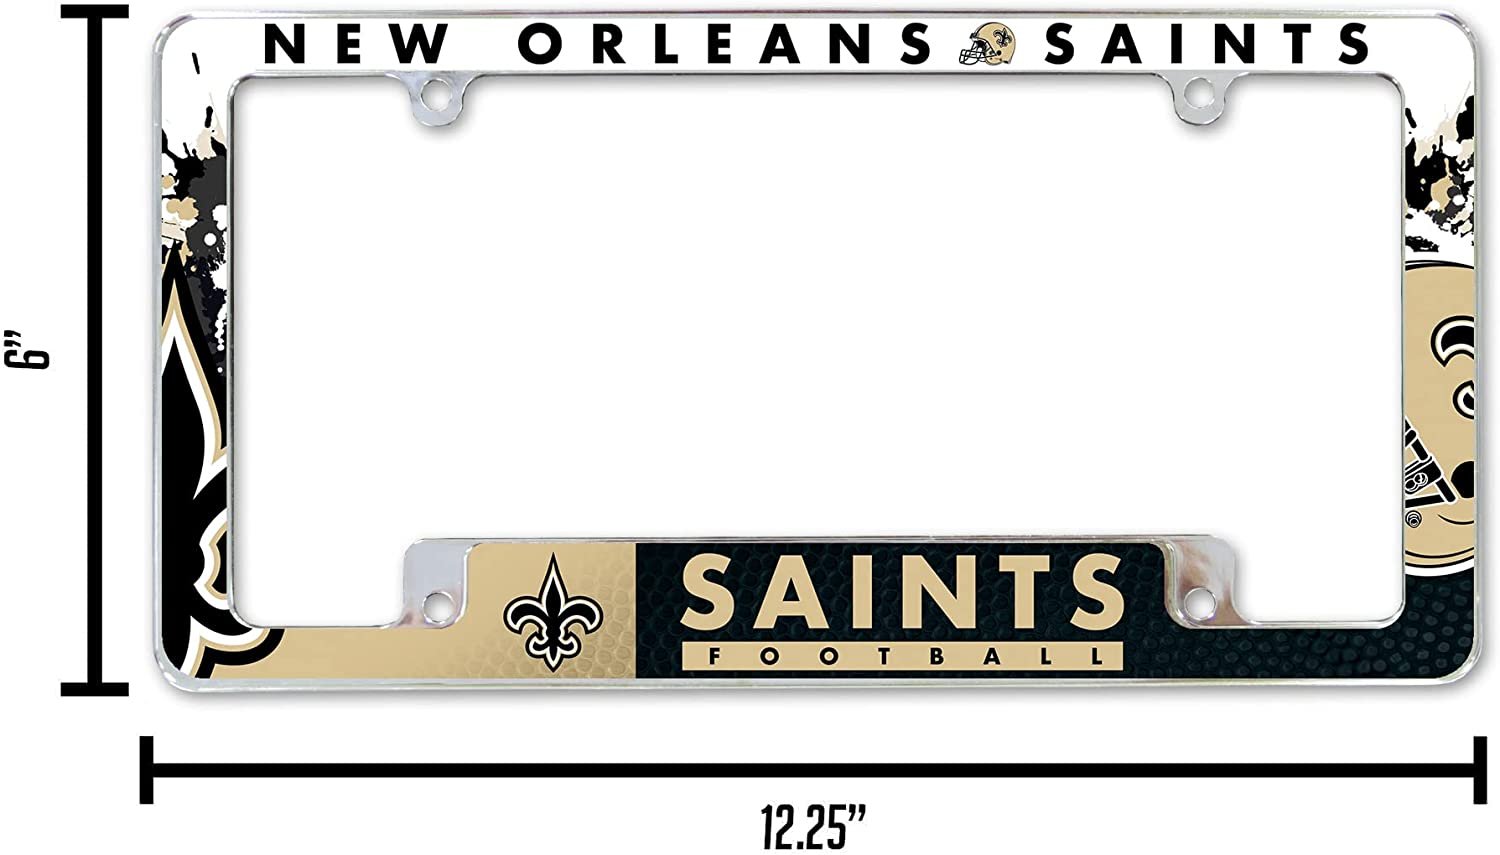 New Orleans Saints Metal License Plate Frame Tag Cover All Over Design EZ View